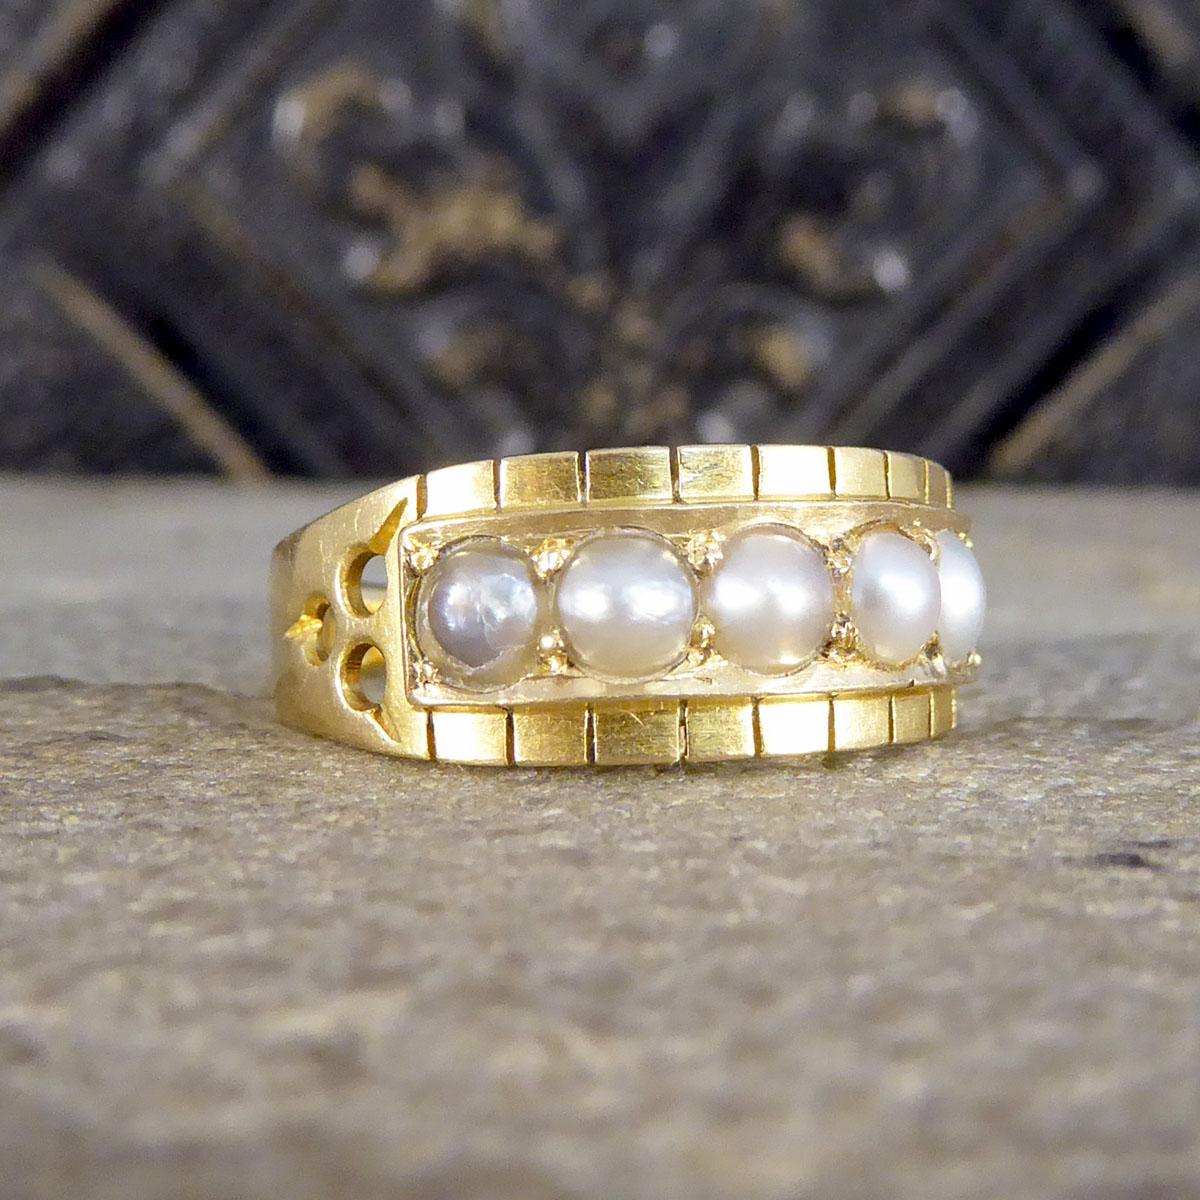 This lovely antique ring was created in the Late Victorian era with a beautifully decorated head to the ring and clear hallmarks on the inside of the band. The hallmarks shows that this ring was hand crafted in Birmingham in 18ct Yellow Gold. It